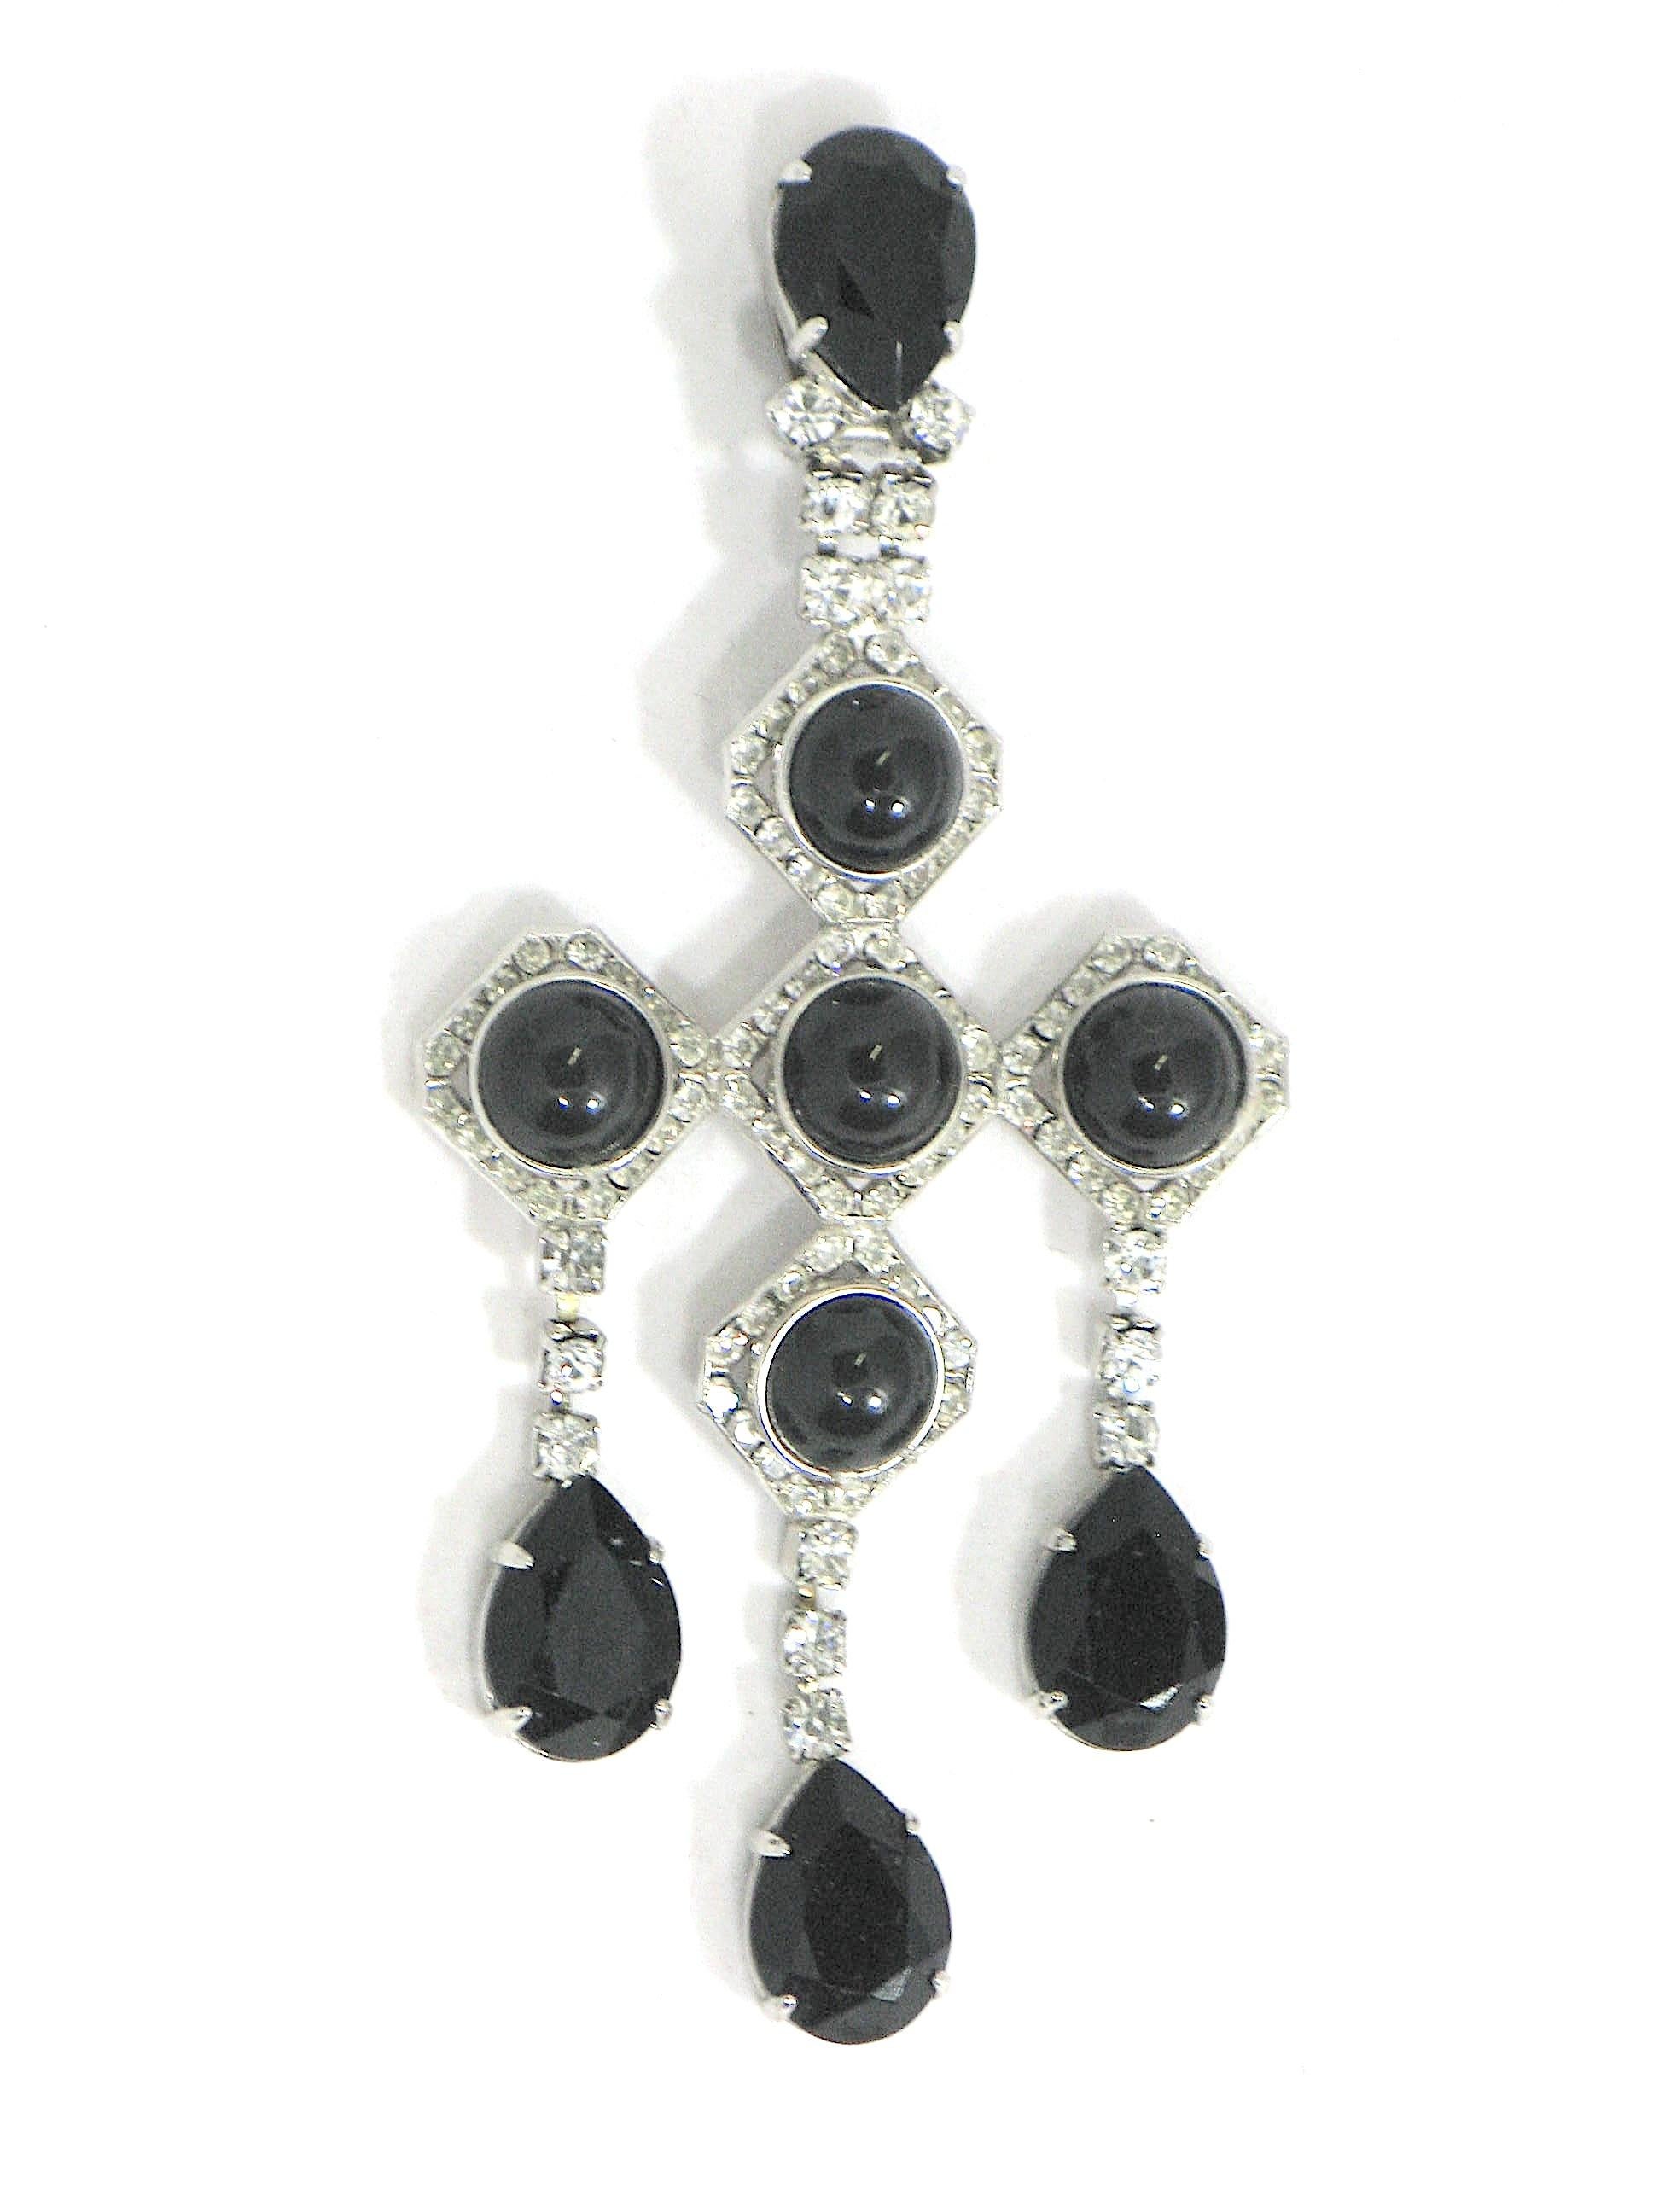 Large Impressive Haute Couture 4 3/4 in. Drop Runway  Earrings-sterling silver, Jet black stones, and diamente trimmed chandelier clip on earrings, For a Society Fashionista who wants to stand out!!

Provenance-formerly belonging to Rebecca